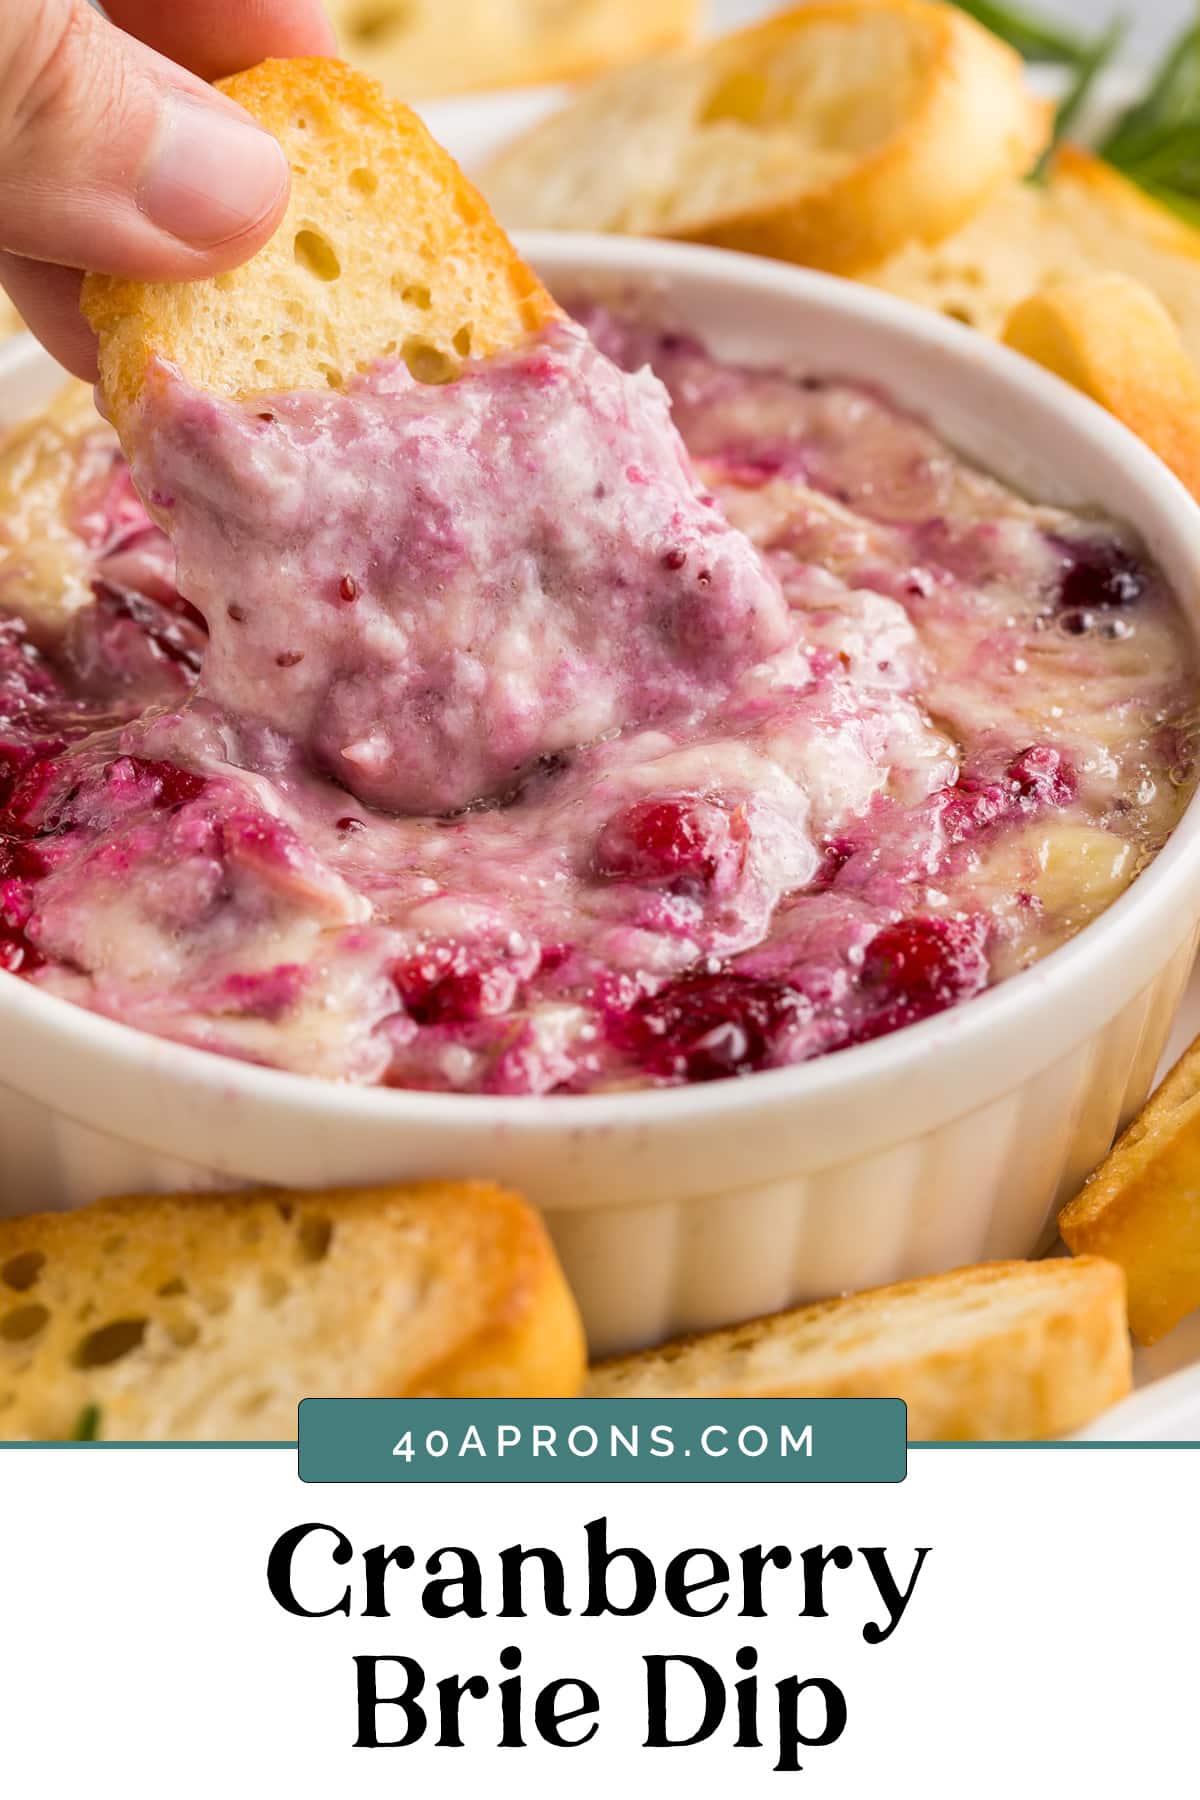 Graphic for cranberry brie dip.